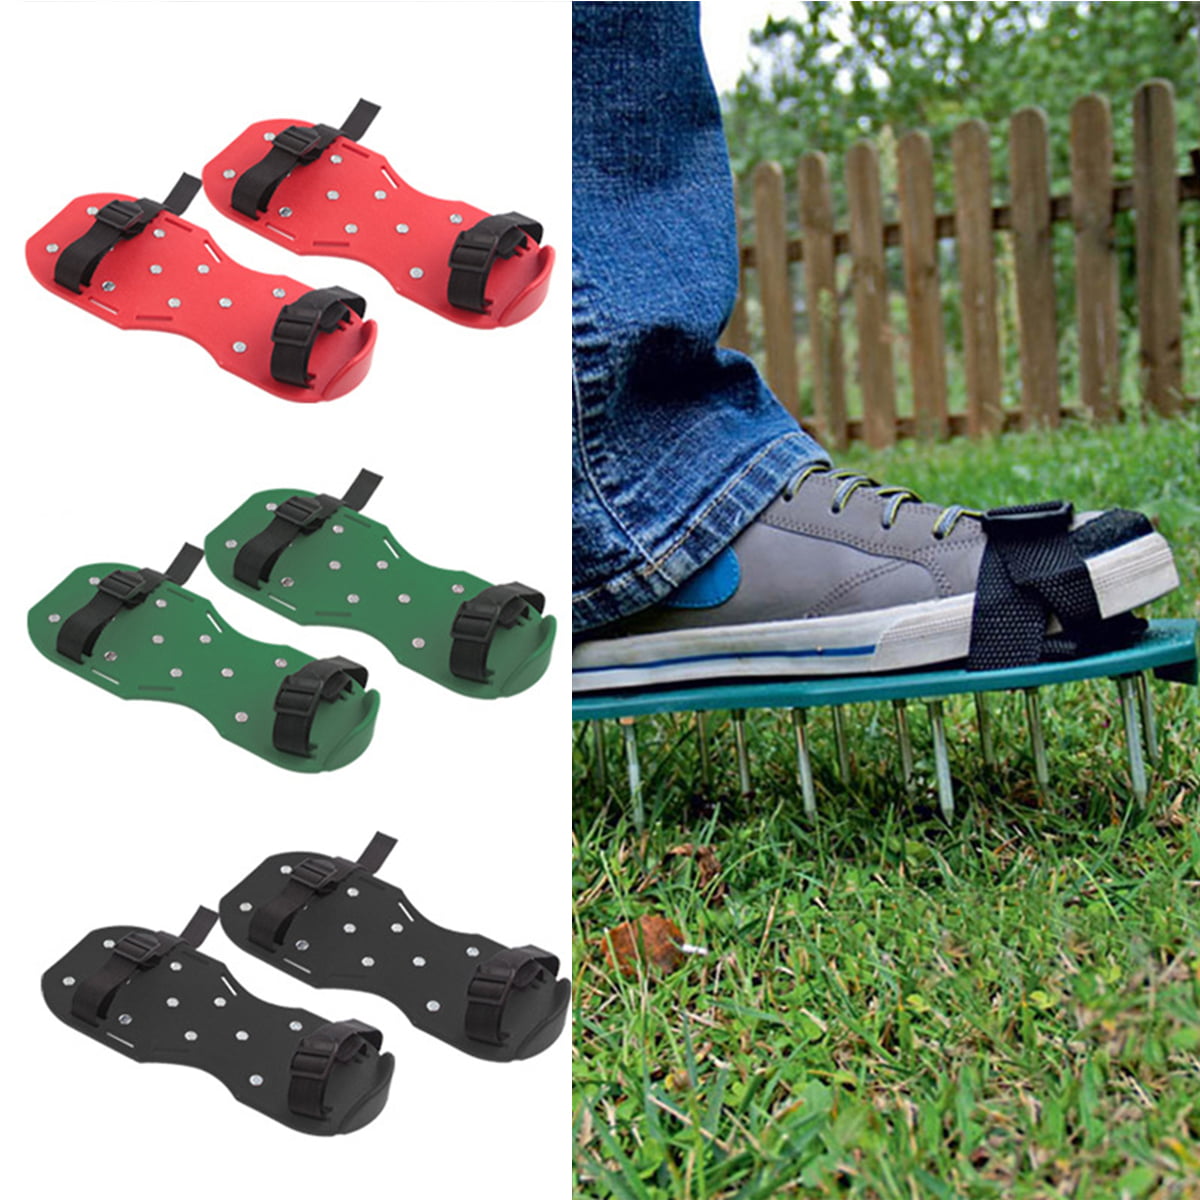 Travelwant Lawn Aerator Shoes for Grass,Aerator Tools Revives Lawn ...